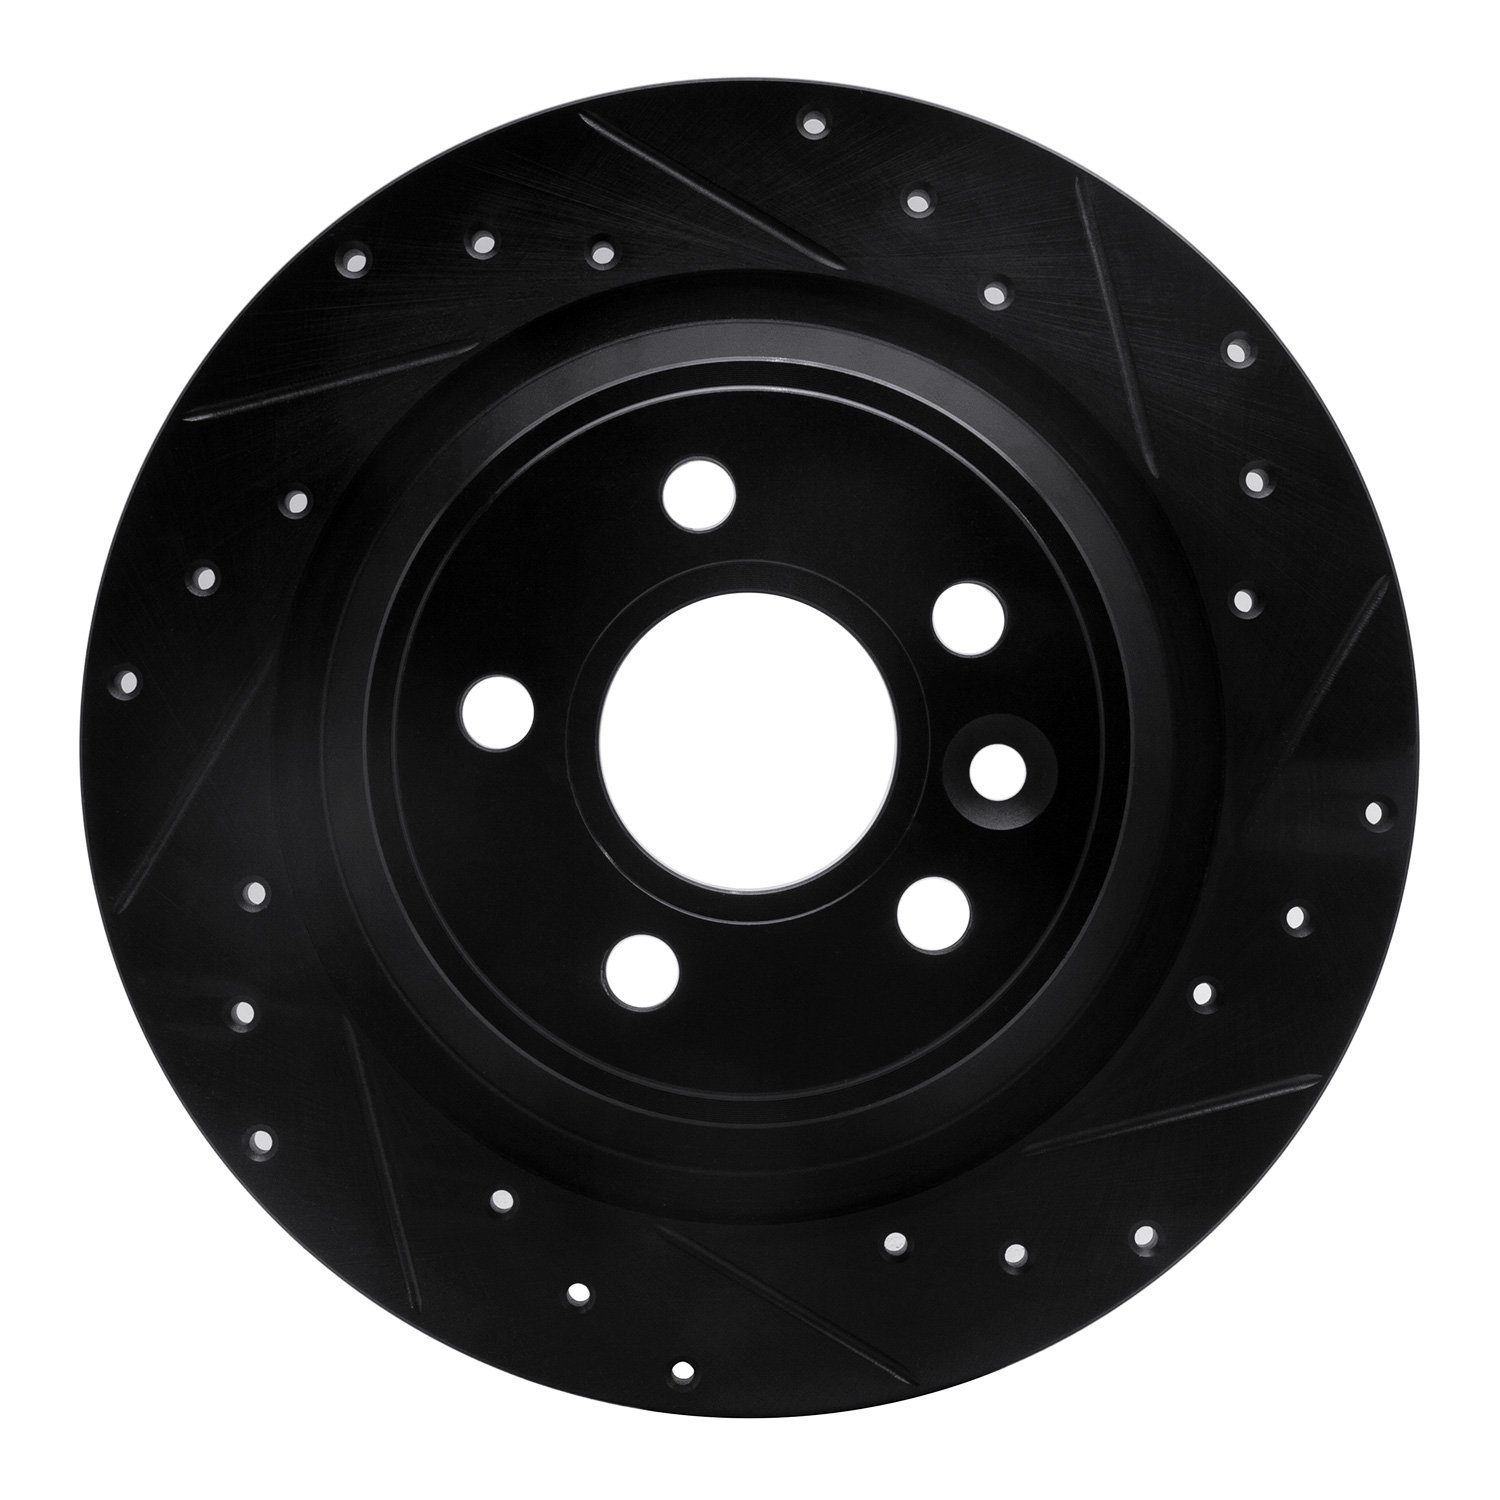 E-Line Drilled & Slotted Black Brake Rotor, 2009-2015 Fits Multiple Makes/Models, Position: Rear Right